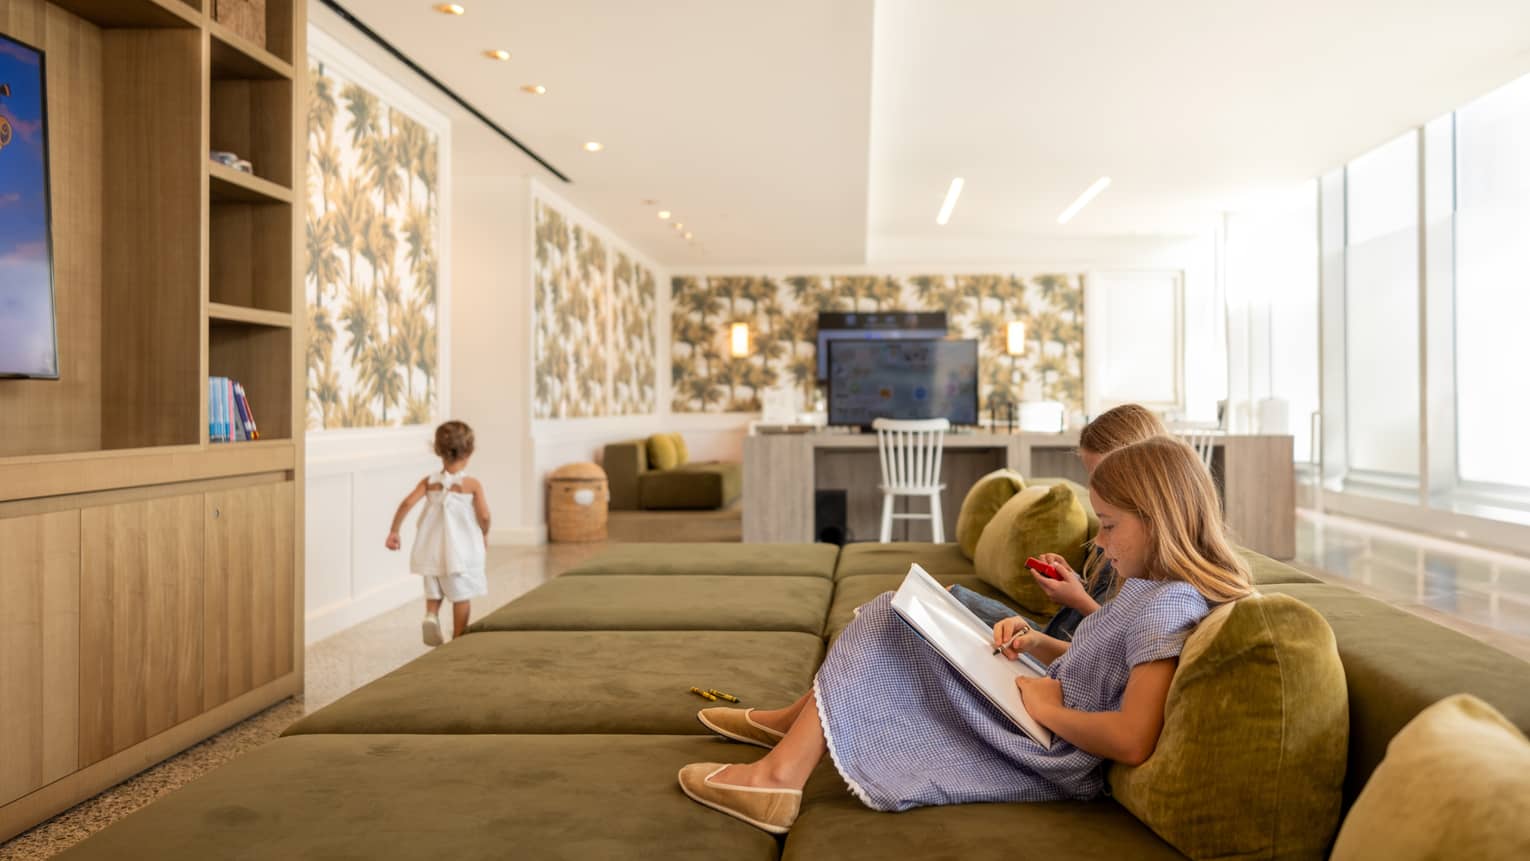 Children watch TV and read books on large sofa in kids club at luxury hotel